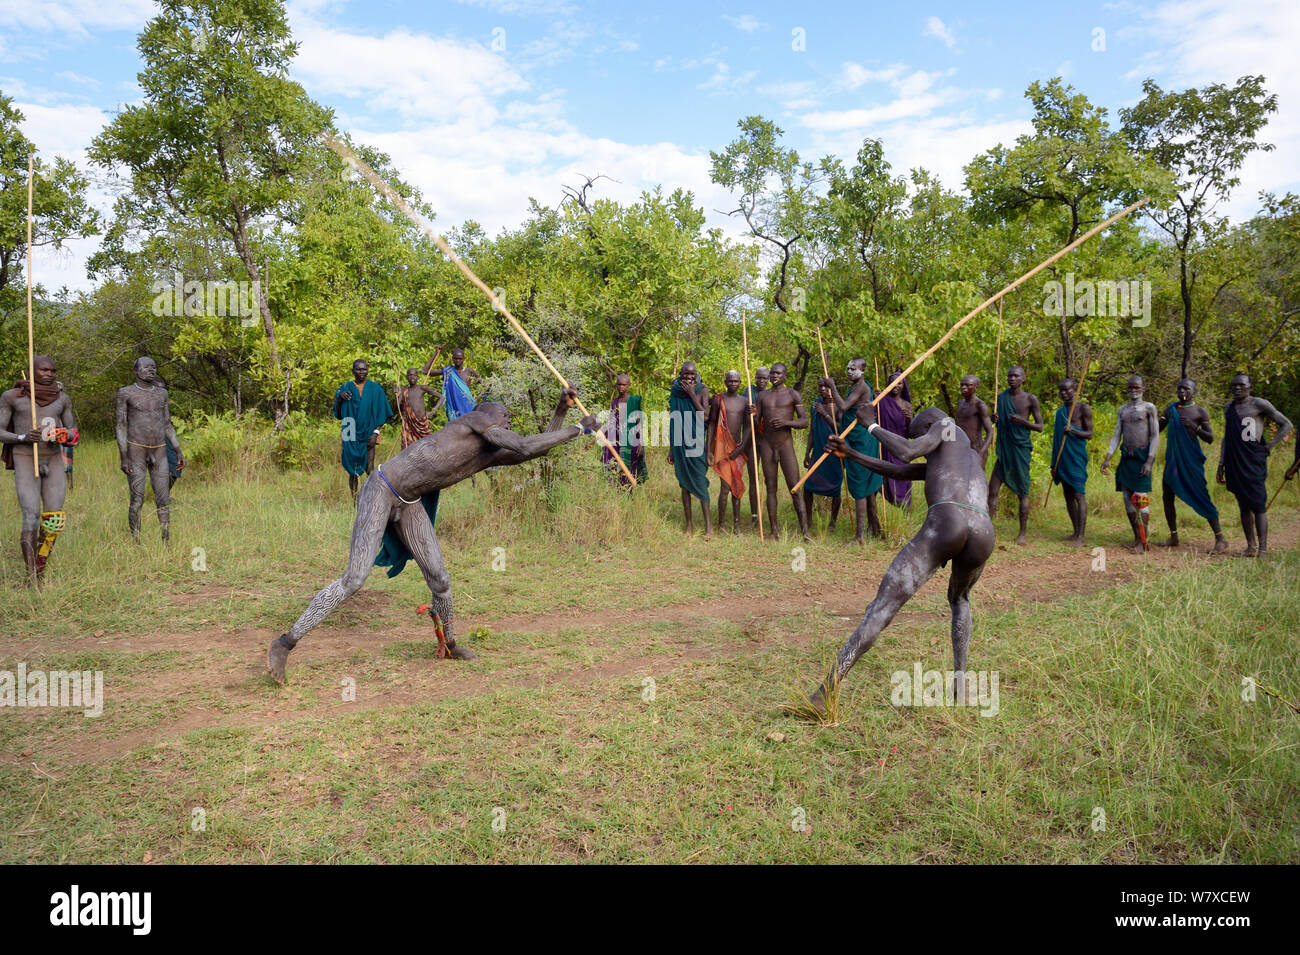 Surma Donga stick fighting - Omo Ethiopia, Once on the fiel…